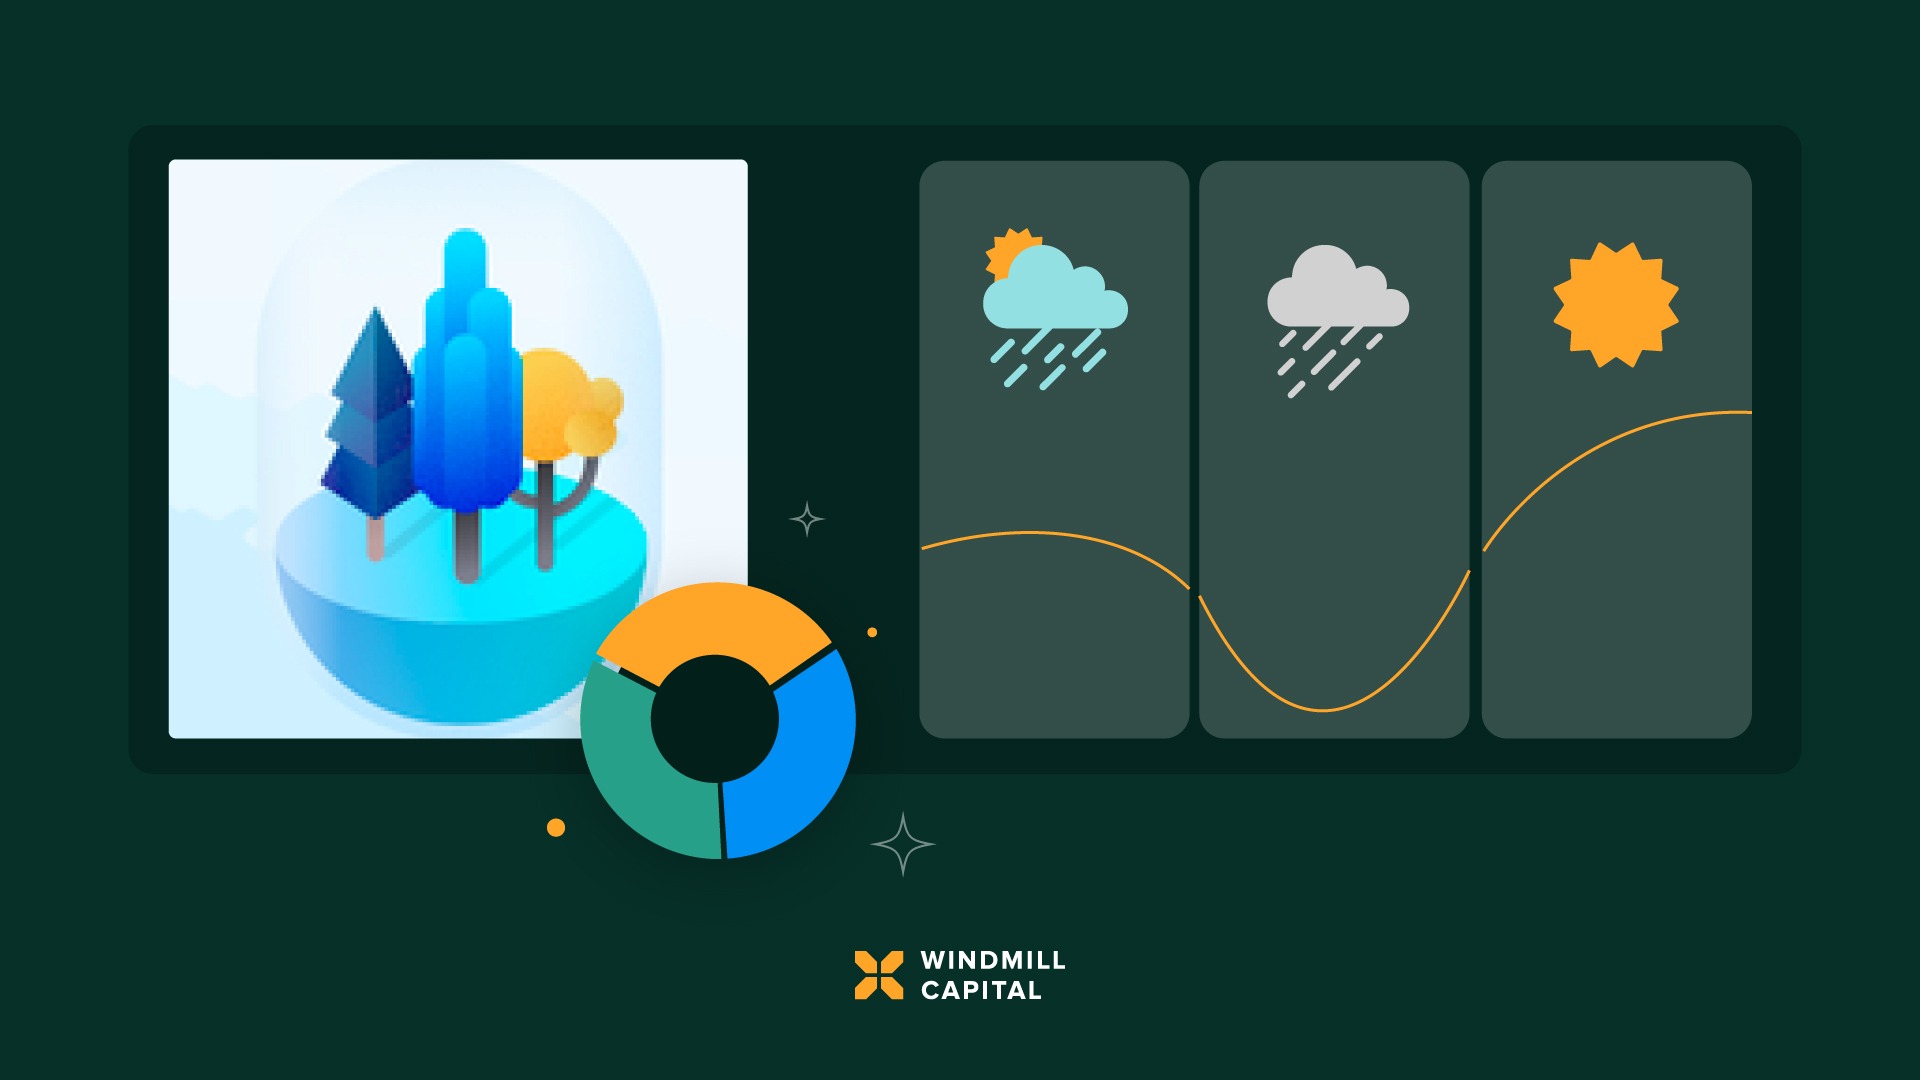 Introducing All Weather Investing smallcase